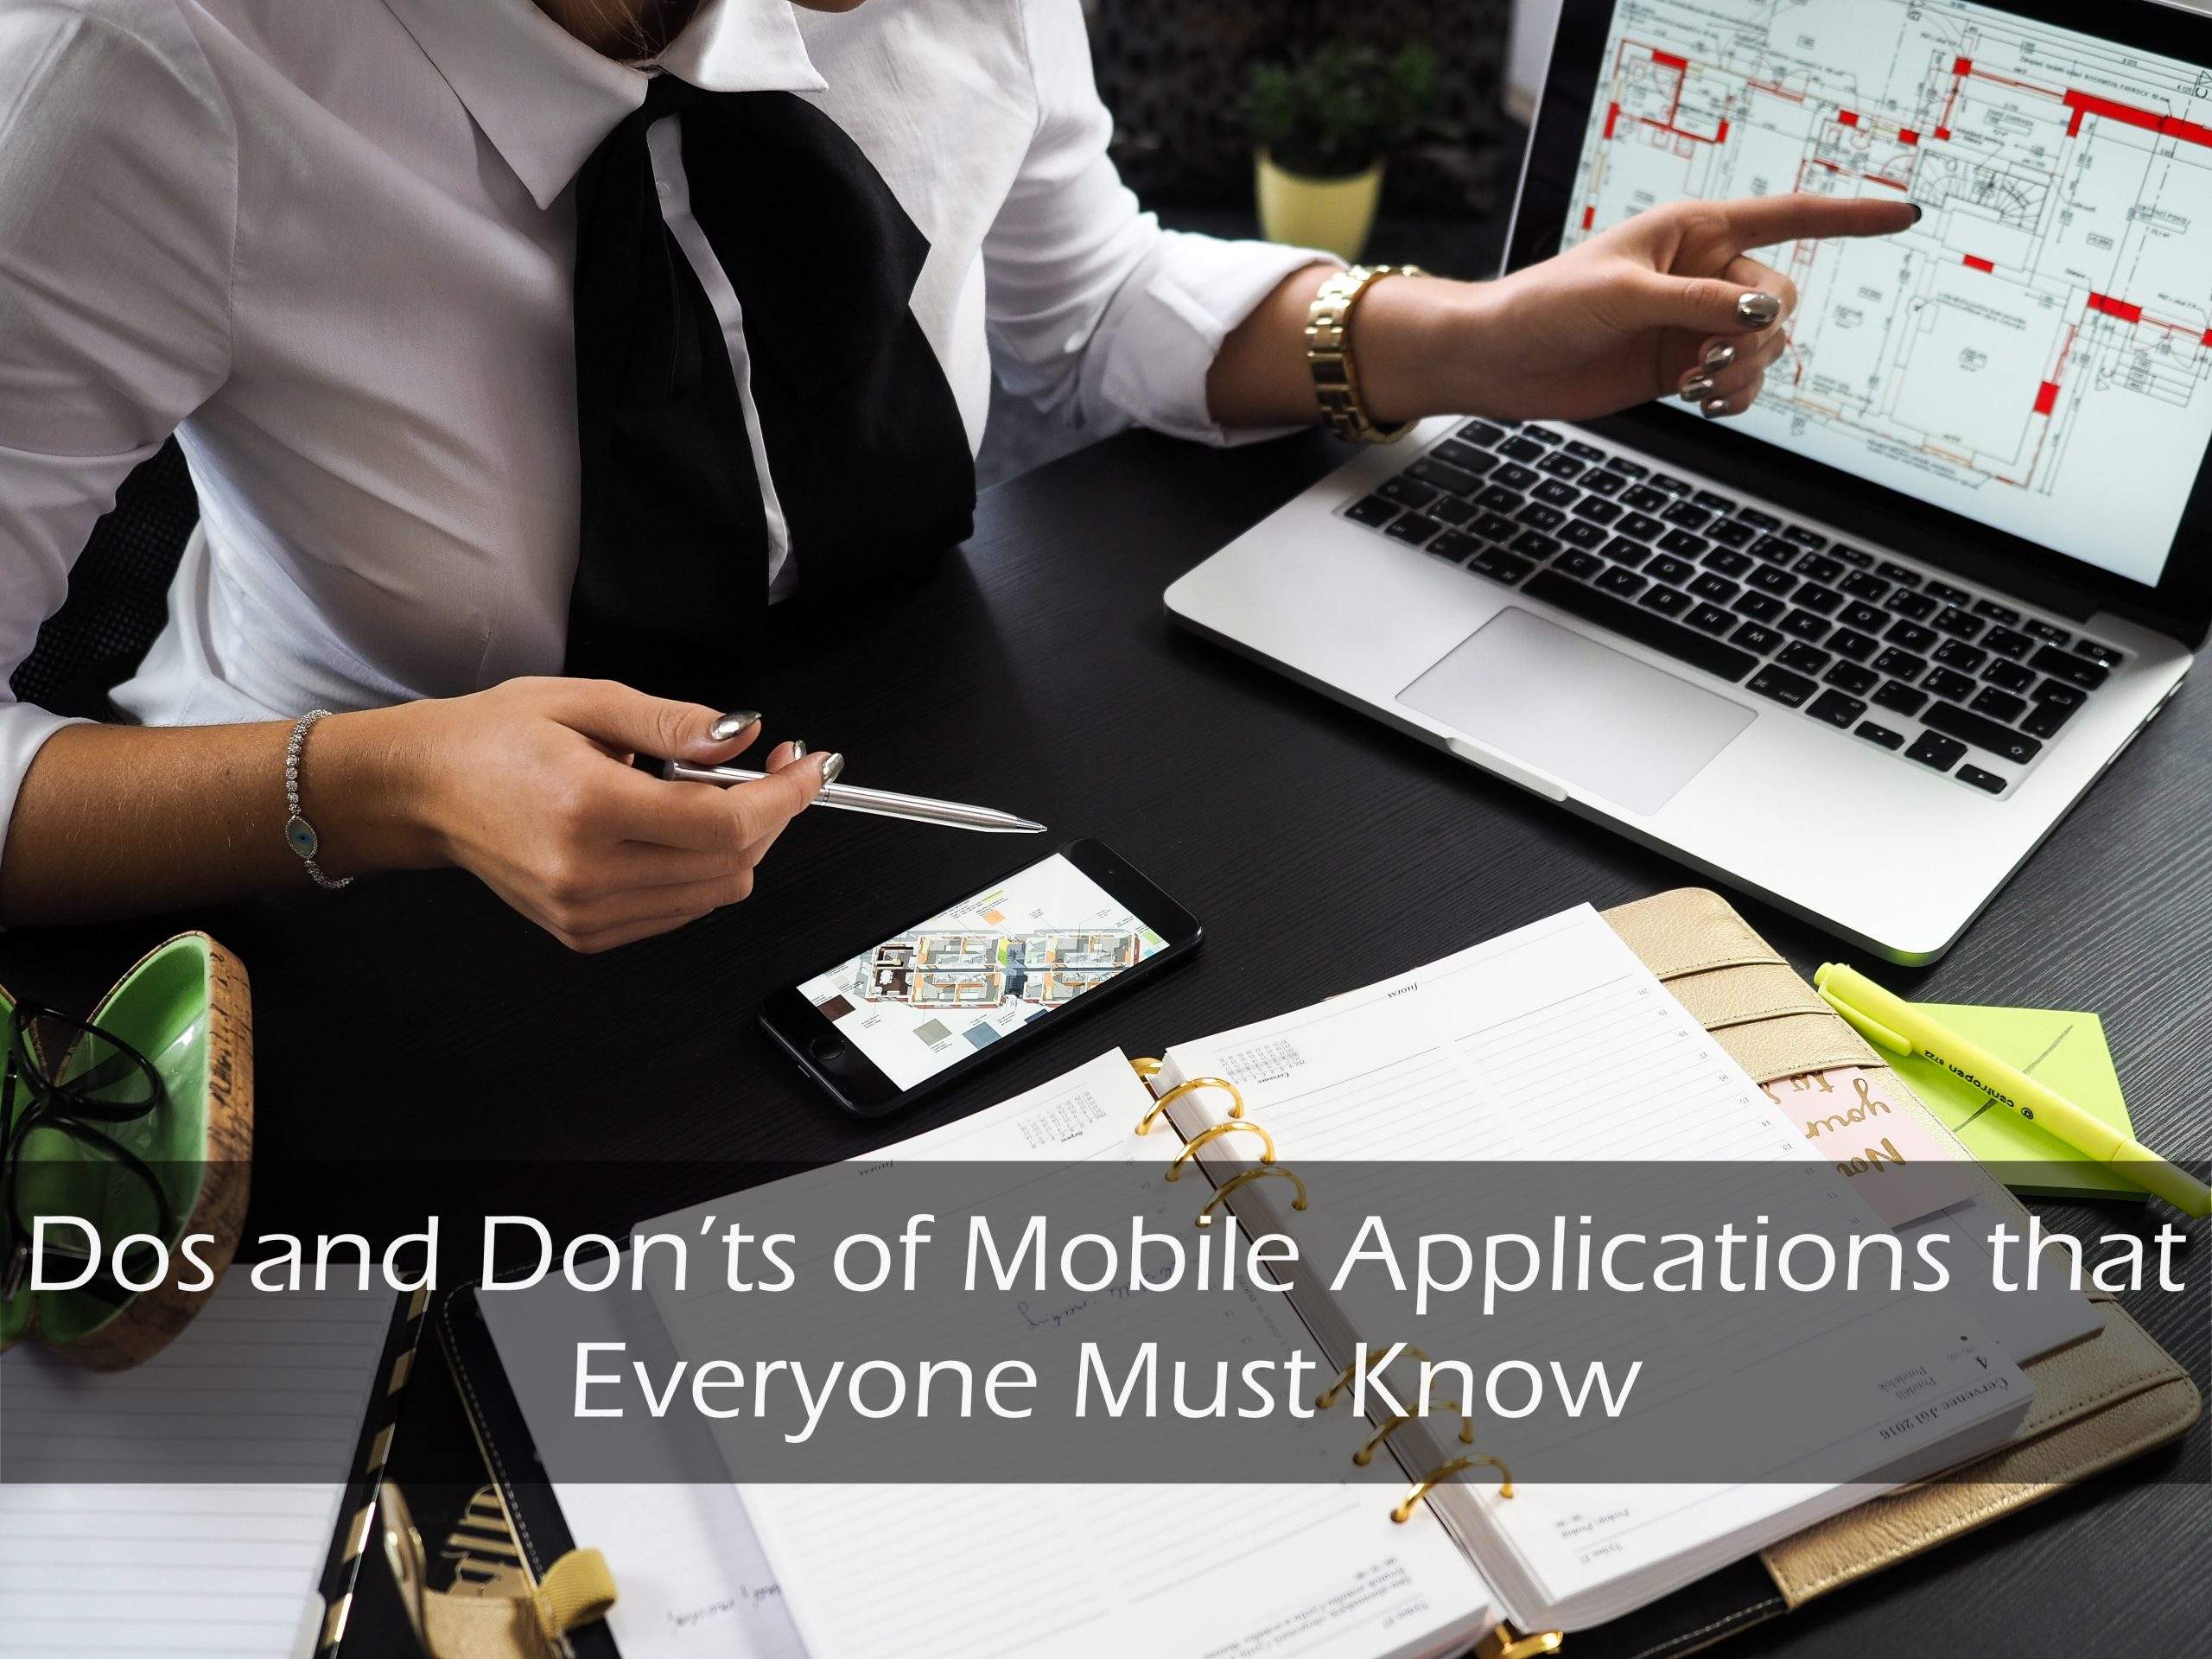 Dos and Don’ts of Mobile Applications that Everyone Must Know